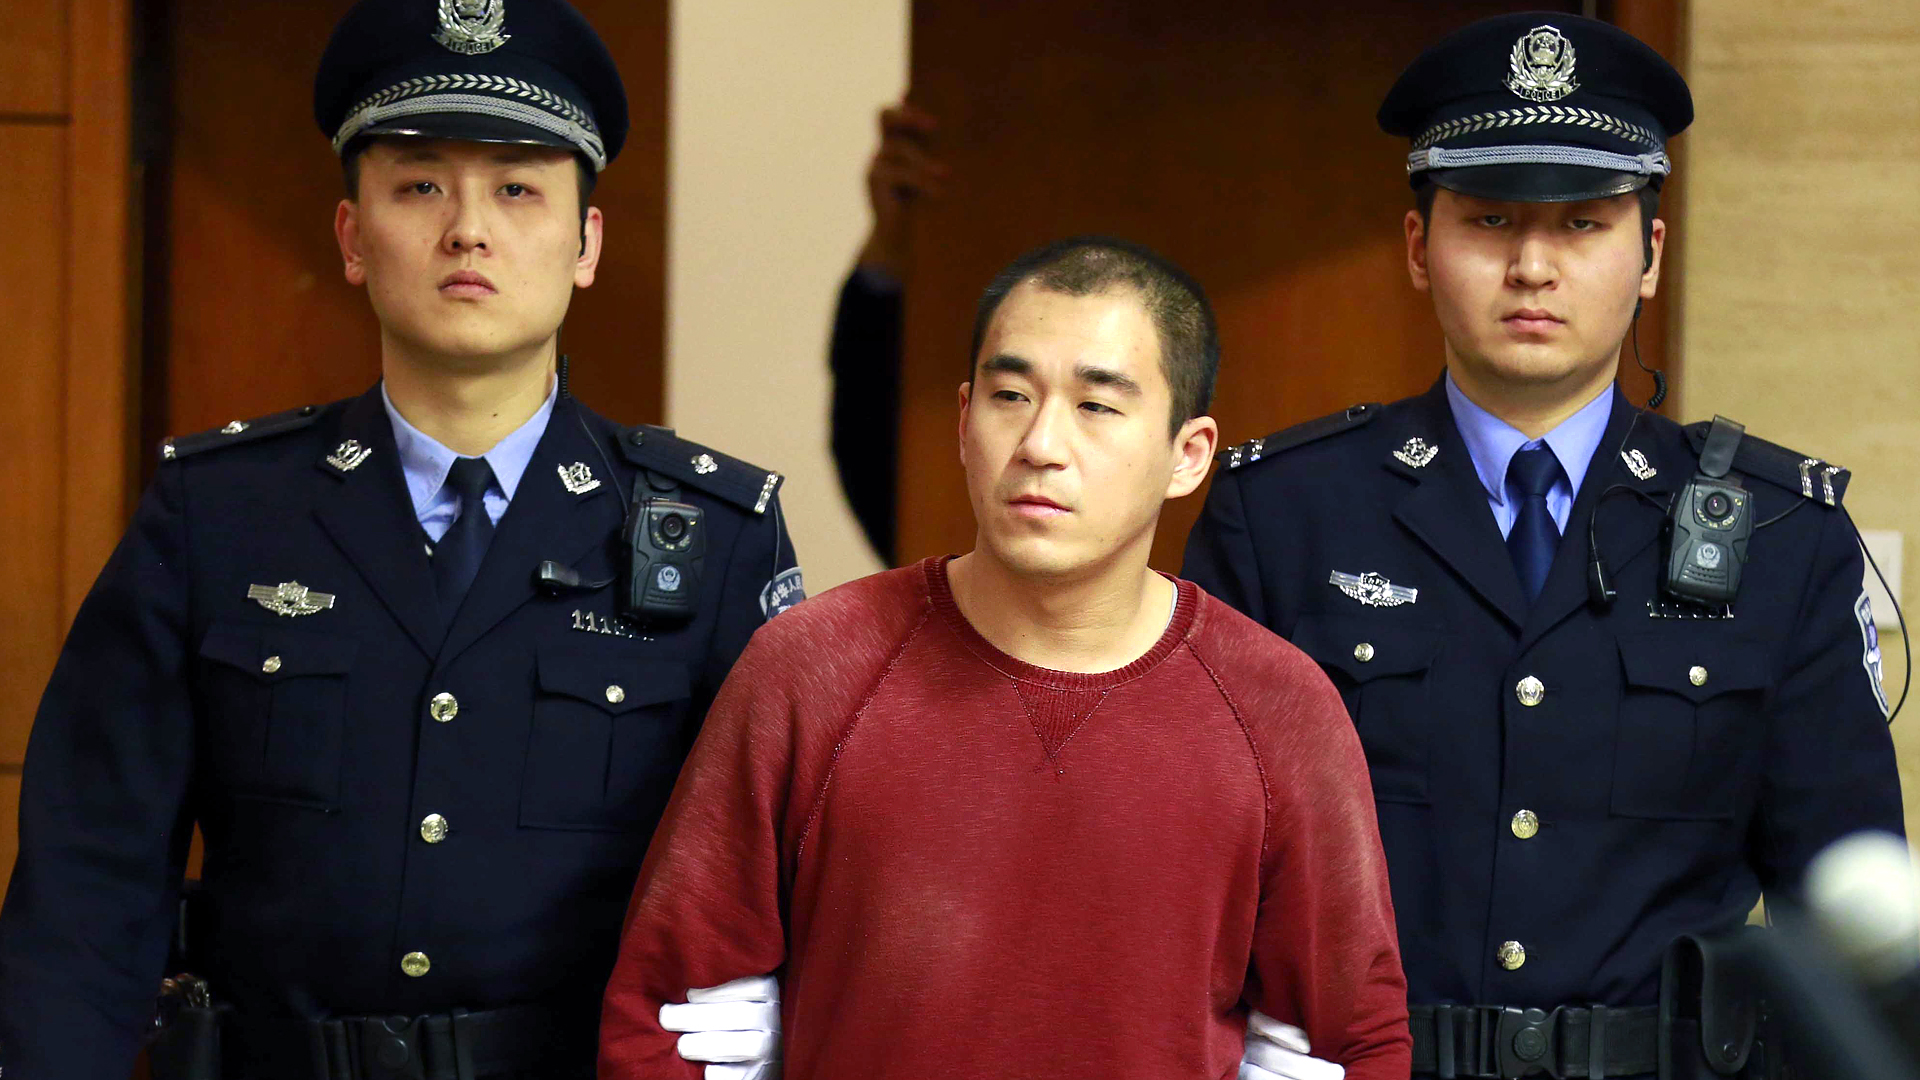 Zhang Mo, son of renowned actor Zhang Guoli, was sentenced earlier this year by a court in Beijing to six months in prison for drug offenses. Photo: Xinhua